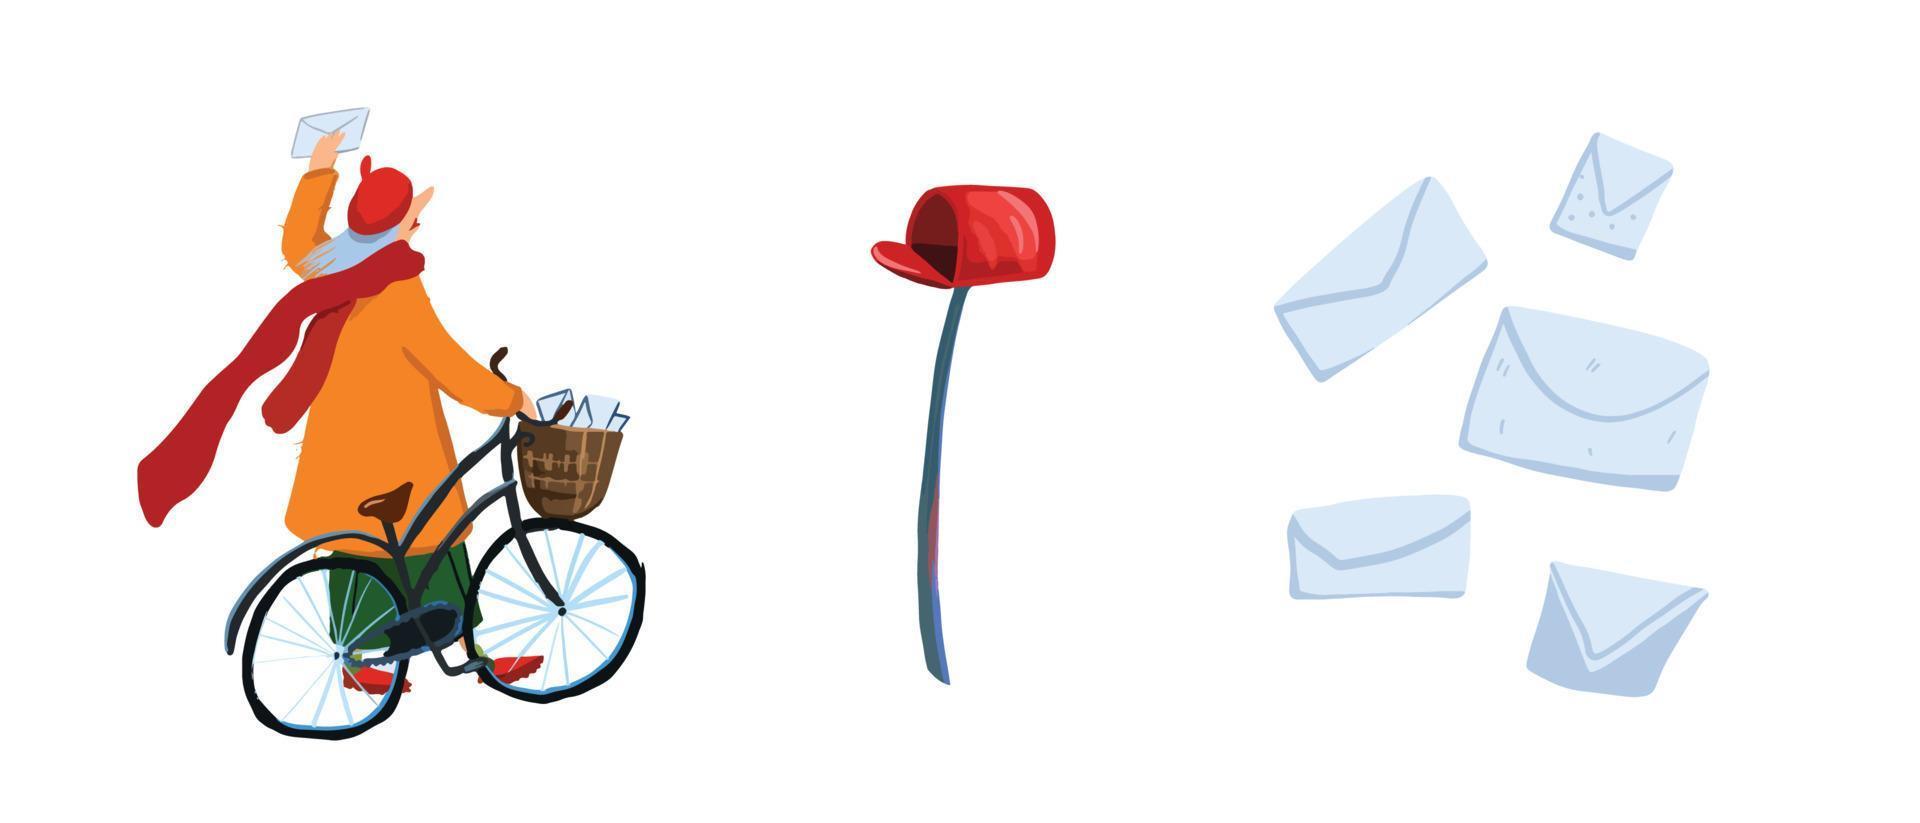 Clipart on the subject of mail postman, letters and a letter box vector